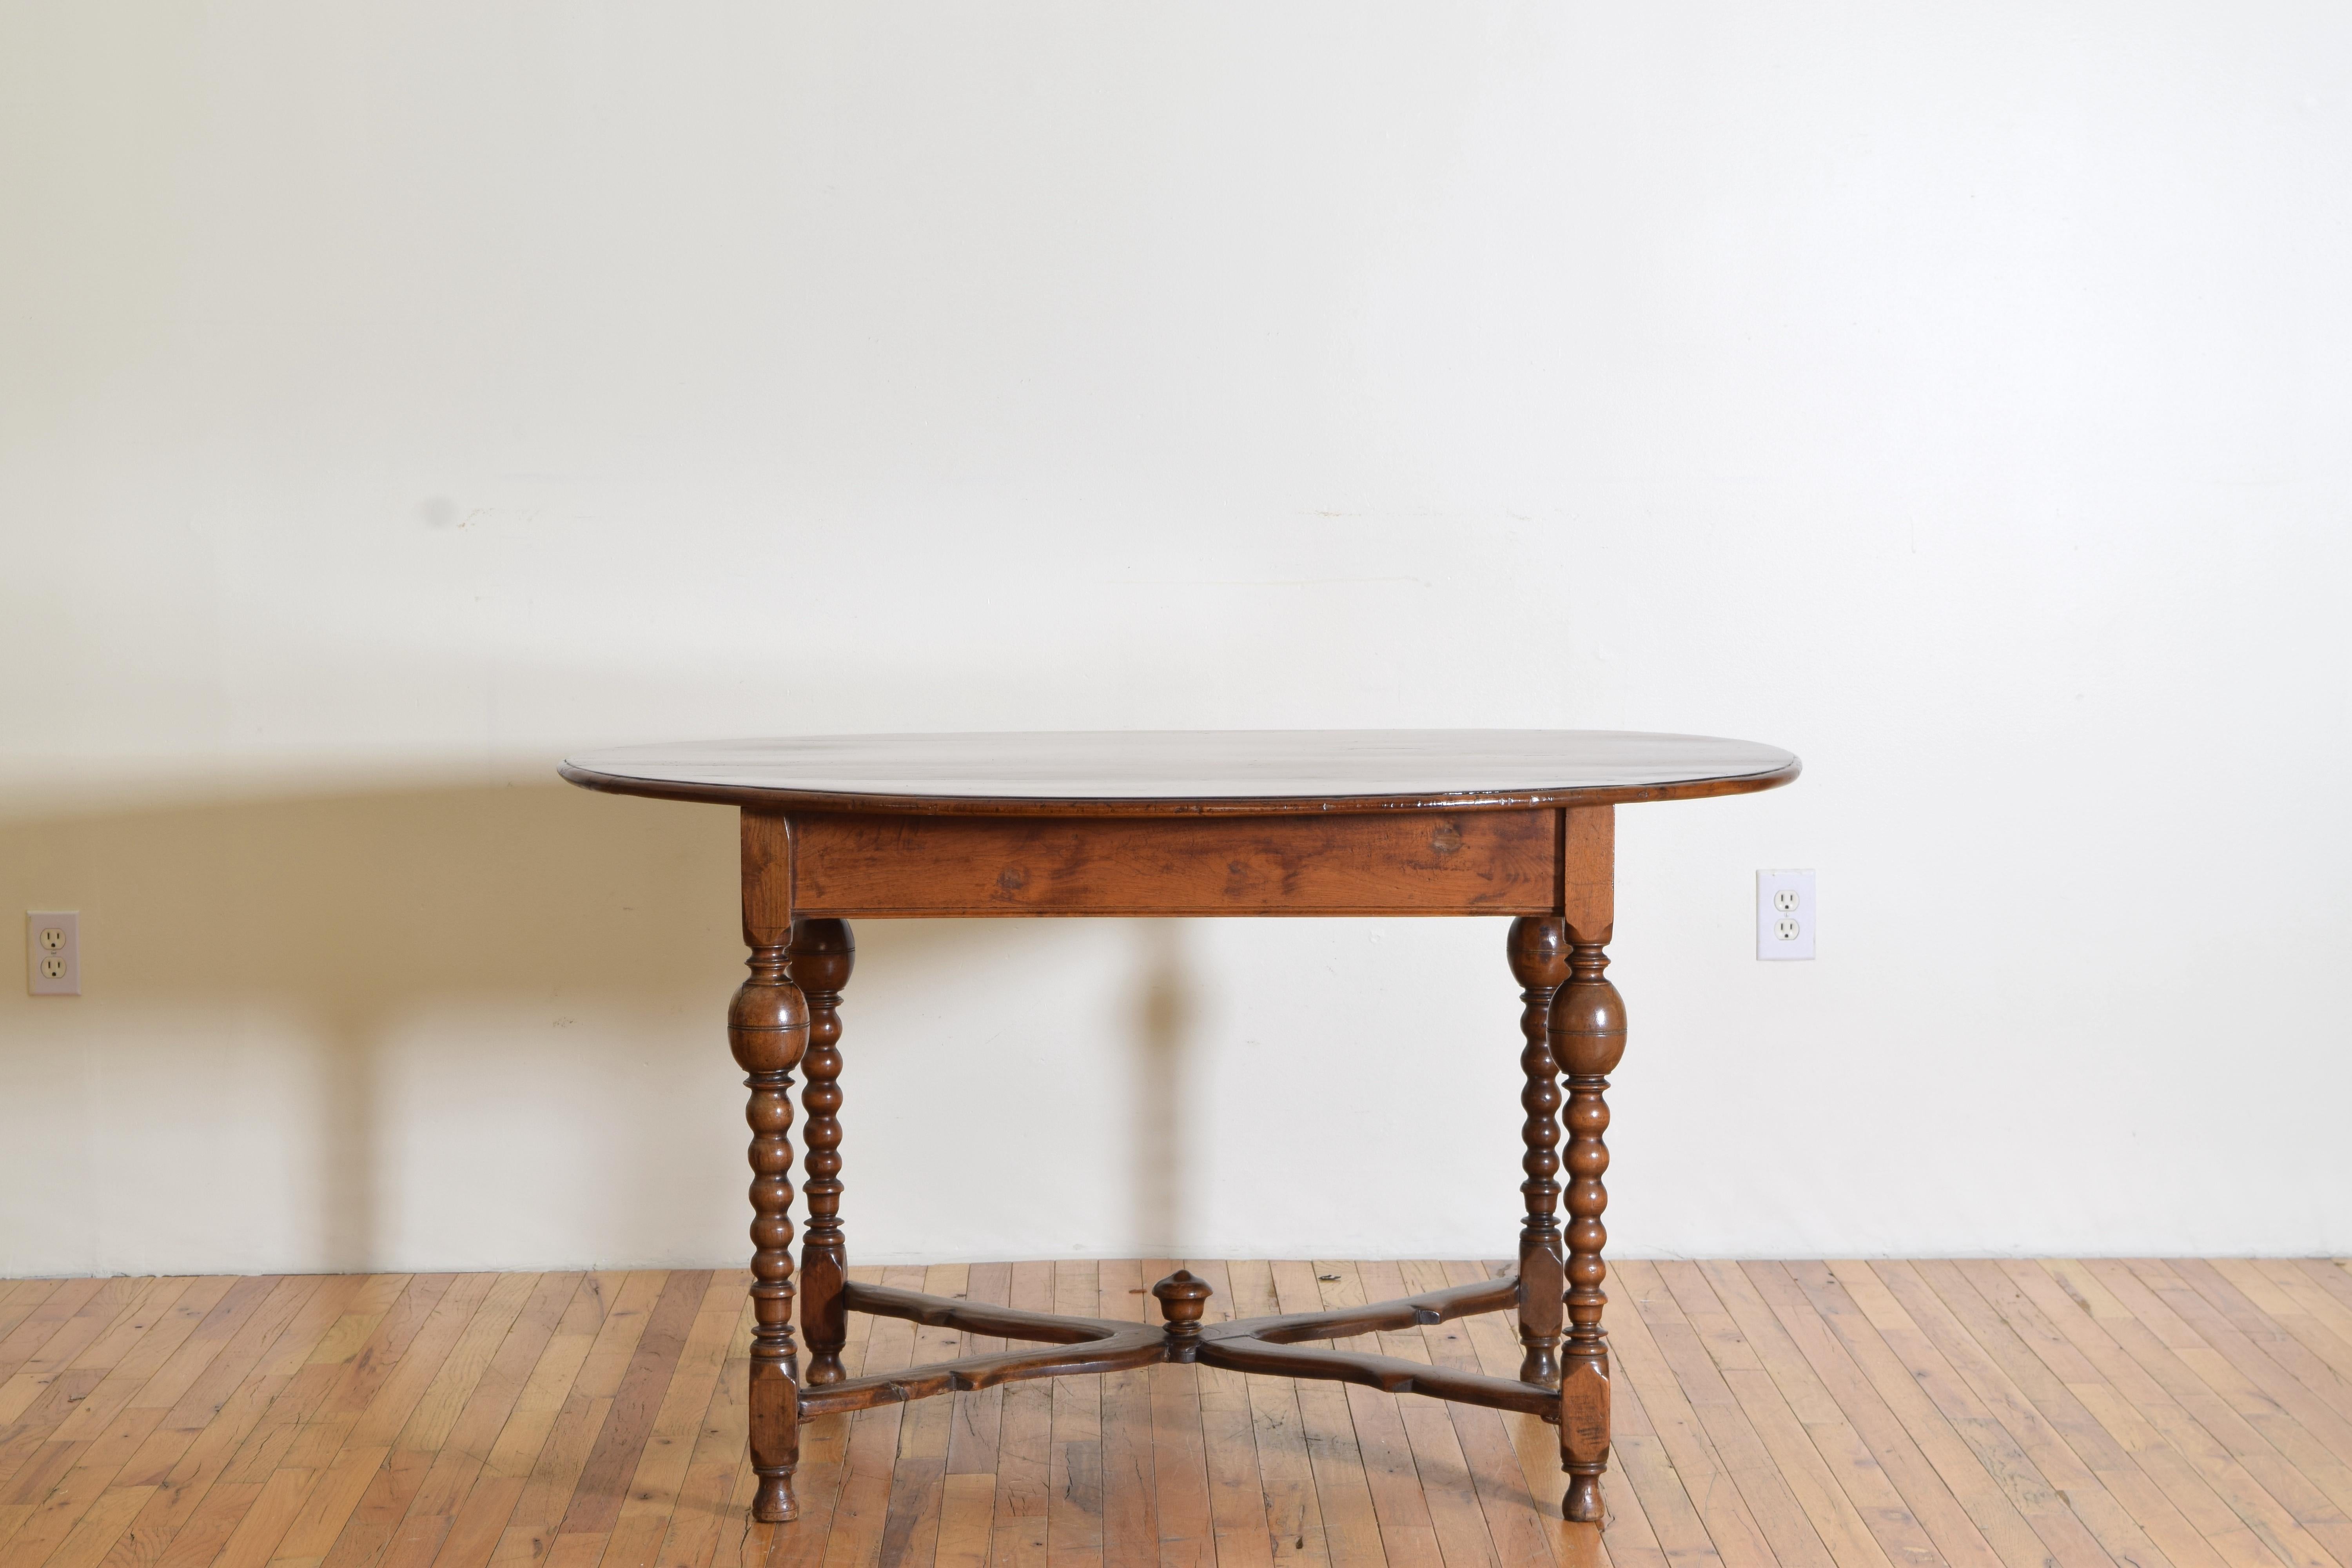 having an oval top with a thin molded edge above a rectangular frame raised on masterfully turned legs joined by a shaped x-form stretcher with a centered finial, resting on small bun feet.